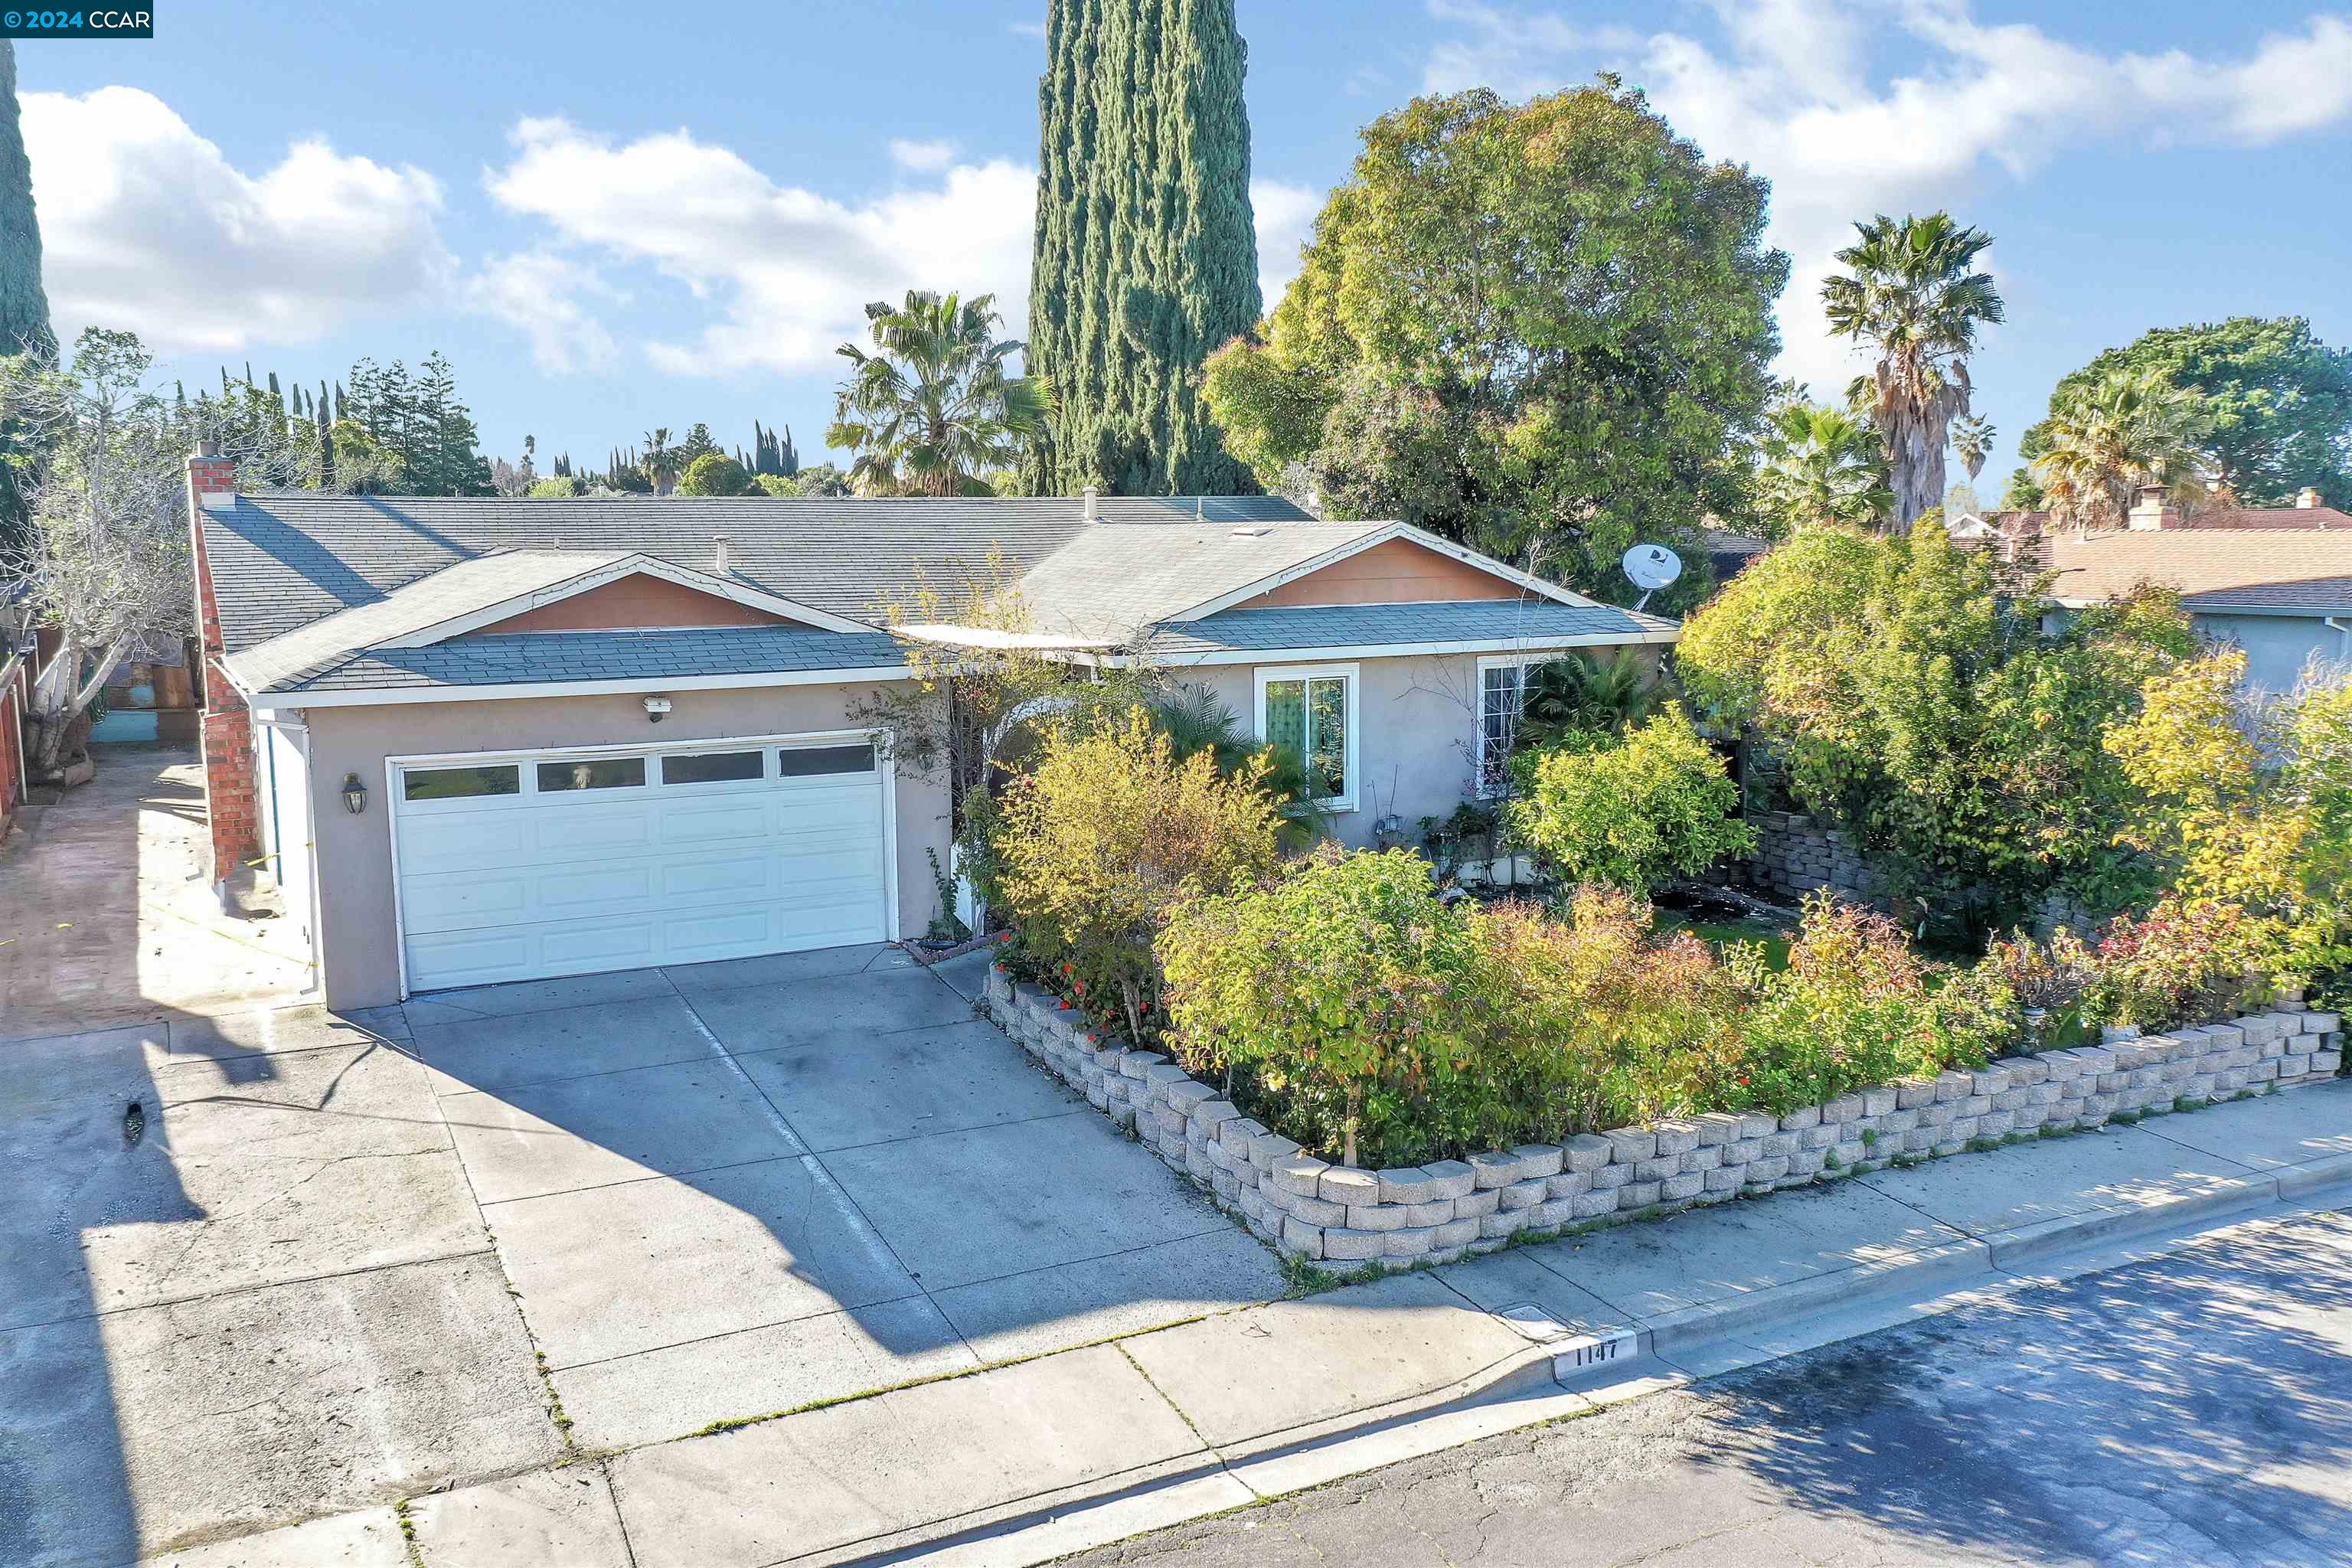 This INCREDIBLE fixer opportunity with a pool and enormous potential in Pittsburg's Vista Del Rio neighborhood! This SINGLE STORY house features 6 bedrooms, possible RV/boat parking and a pool waiting to be brought back to life. Close proximity to schools, parks and trails! This gem is truly a Must See and will go fast! Come take a look today!